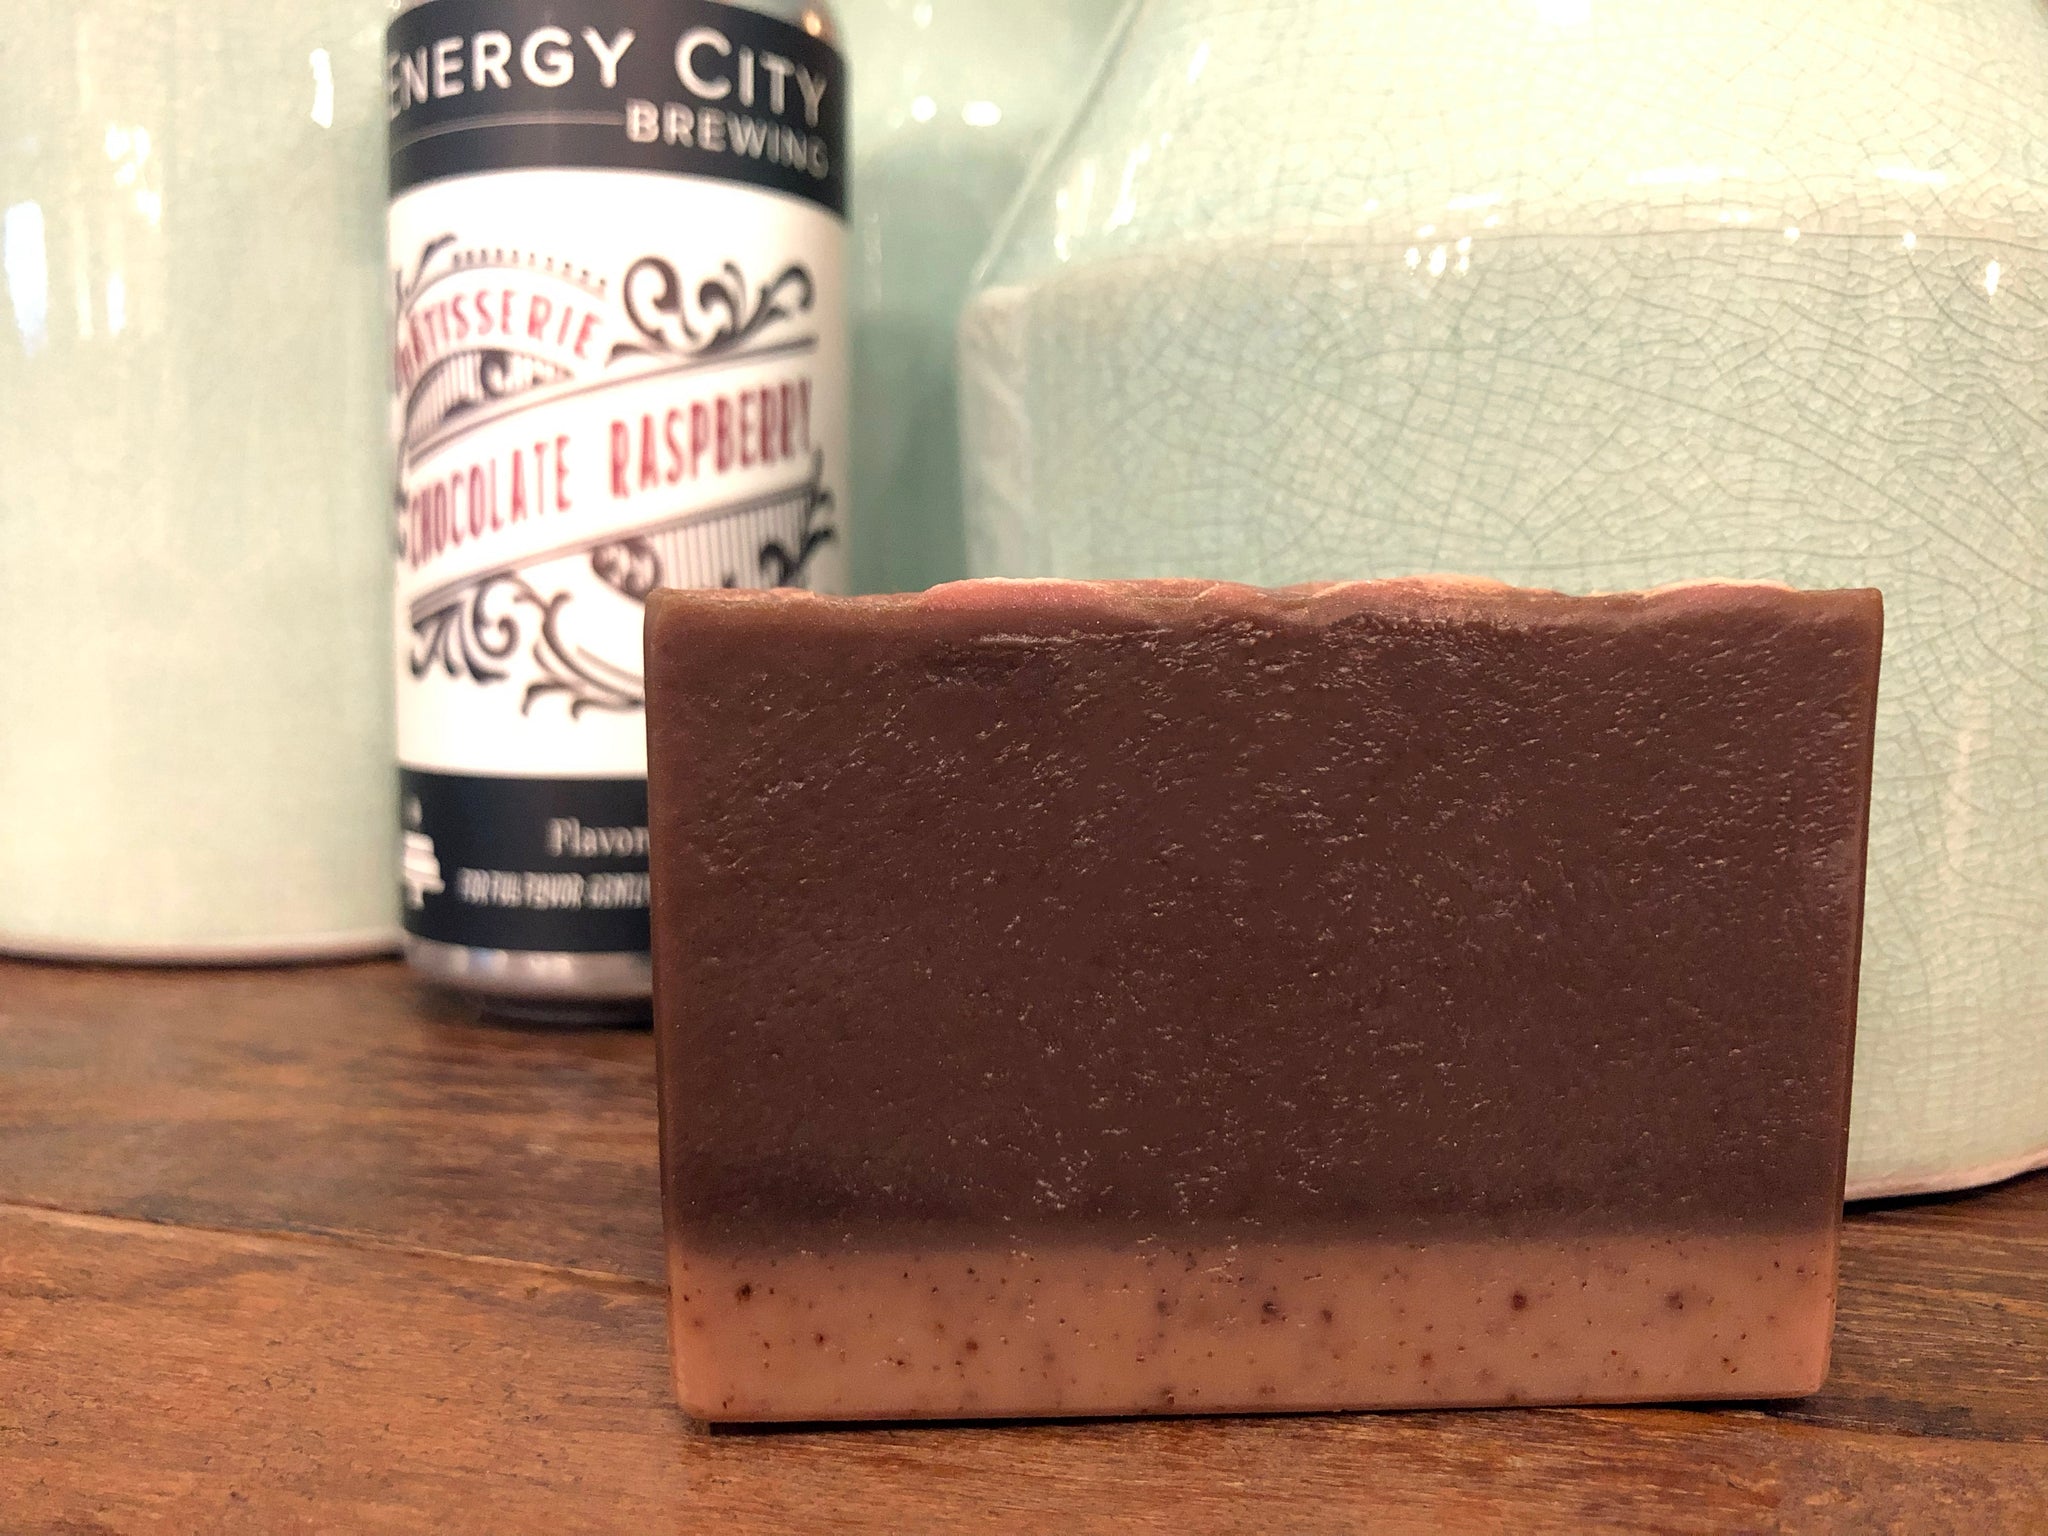 Illinois craft beer soap handmade with Bâtisserie Chocolate Raspberry Tart craft stout beer from energy city brewing Illinois craft brewery chocolate raspberry beer soap by spunkndisorderly craft beer exfoliating beer soap for him chocolate raspberry tart inspired soap with apricot seed powder 